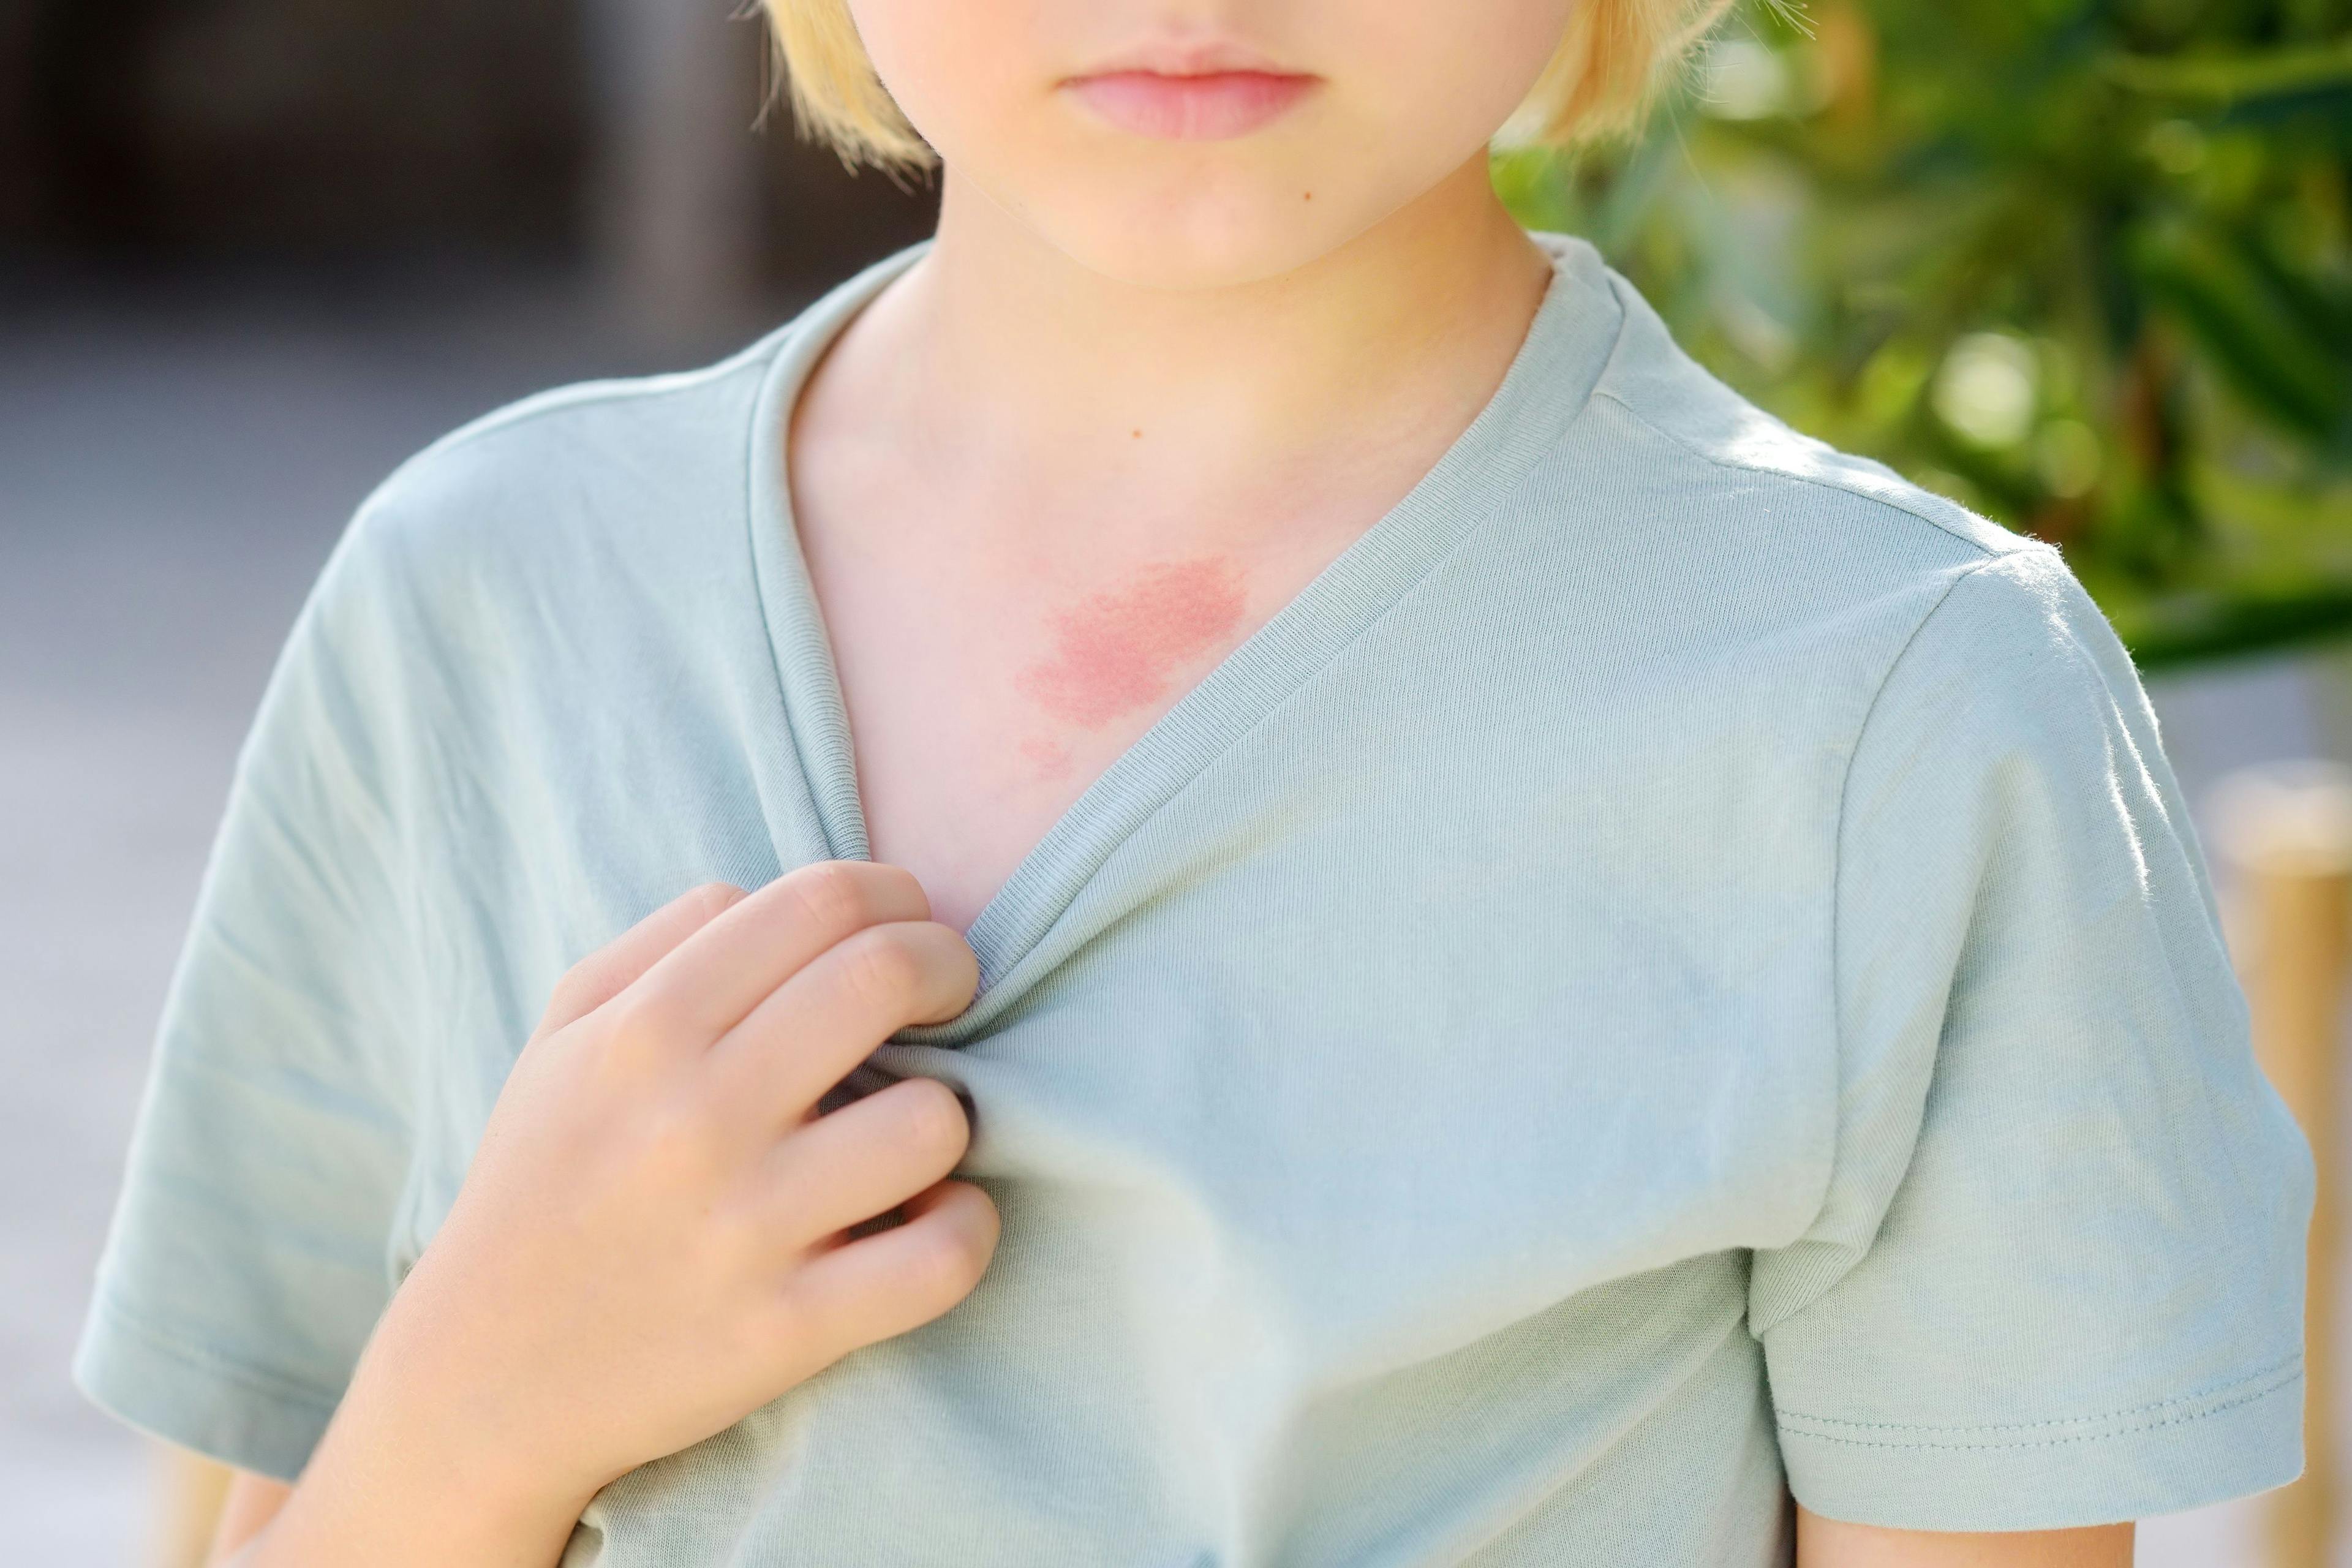 Young Patients With Dermatologic Conditions Face Increased Risk of Attachment Insecurity